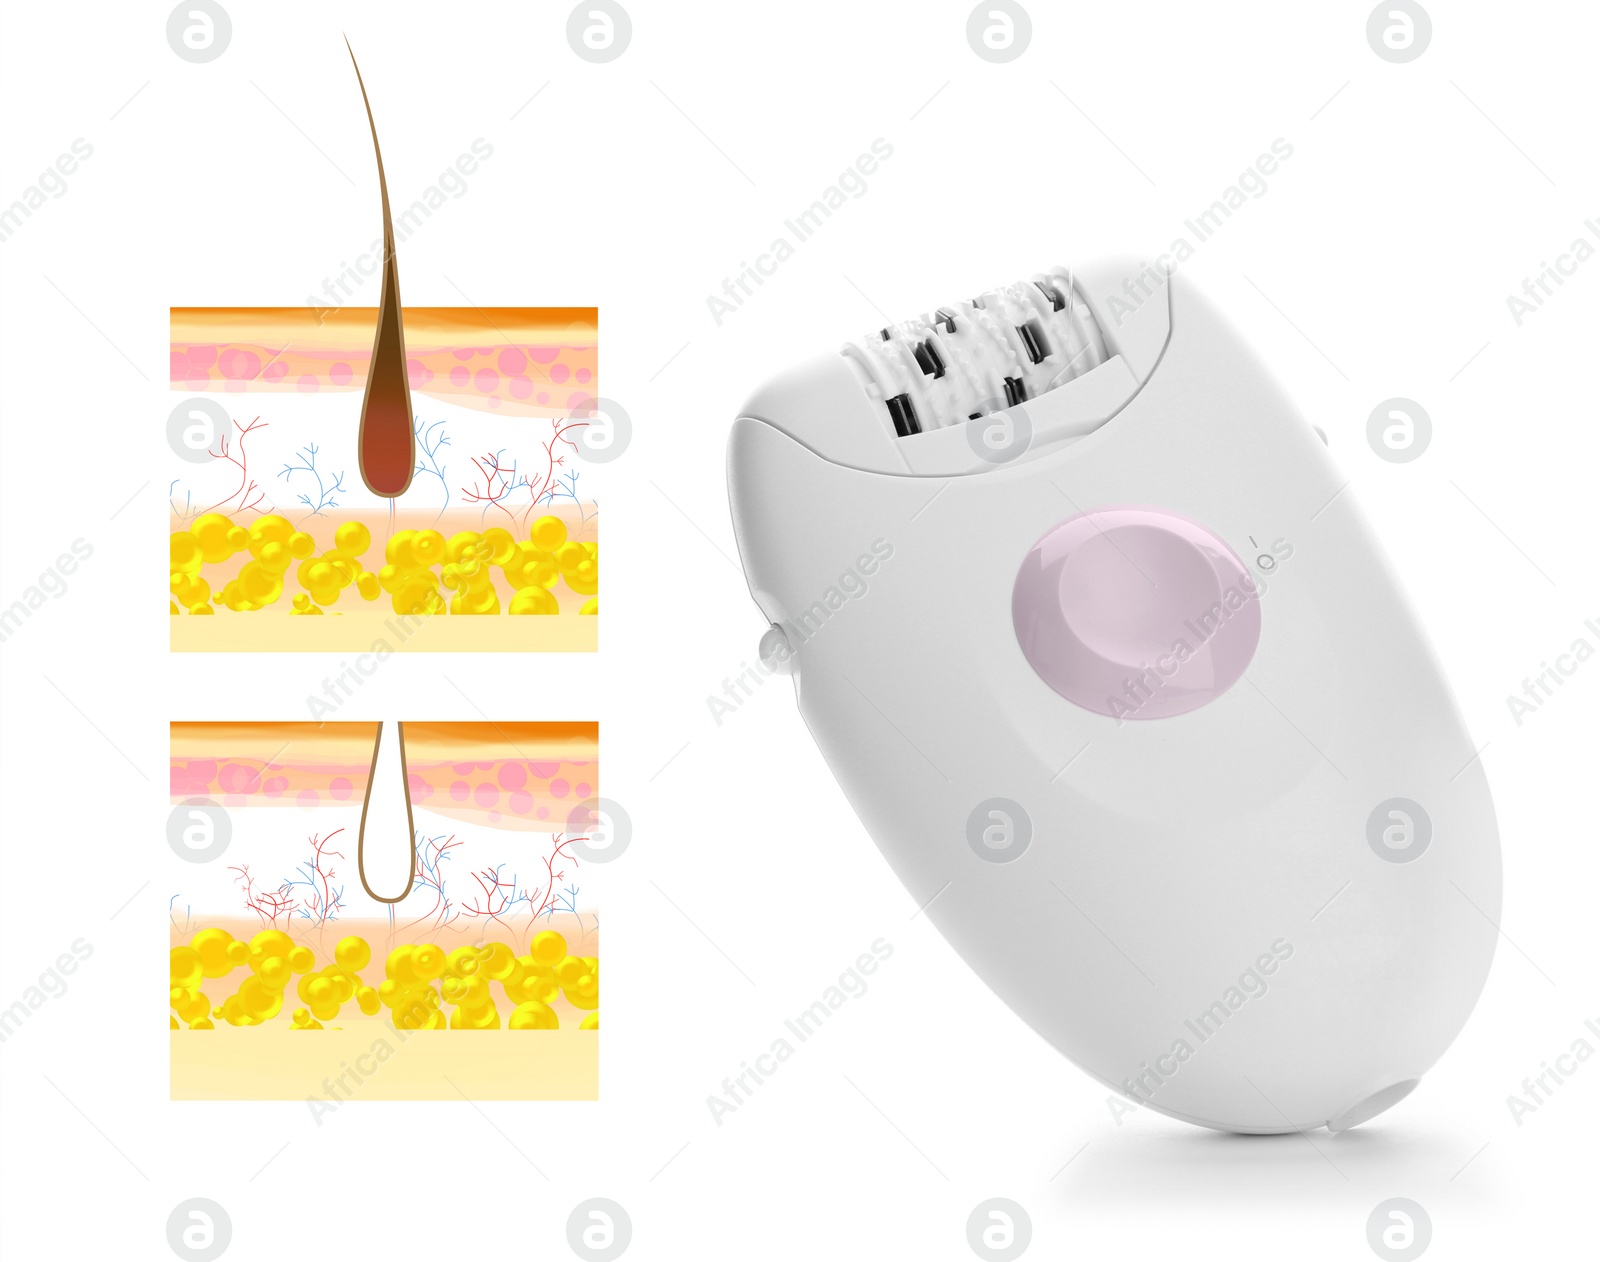 Image of Epilation procedure. Modern appliance and illustrations of hair follicle on white background